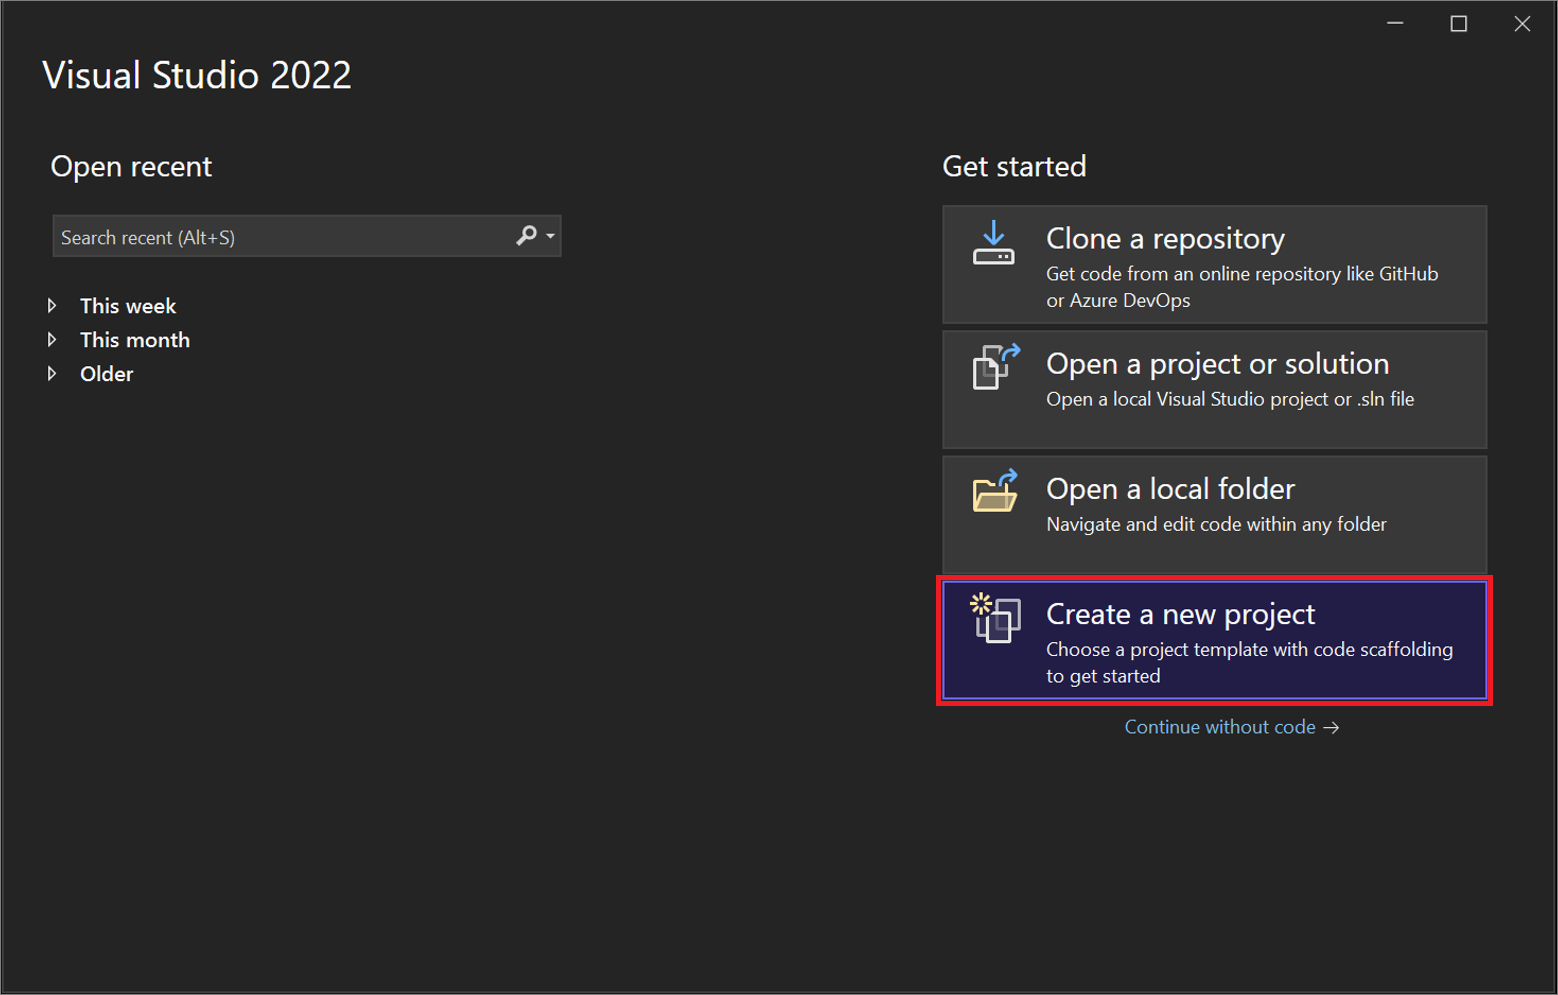 Screenshot of the start window in Visual Studio 2022 with the 'Create a new project' option highlighted.